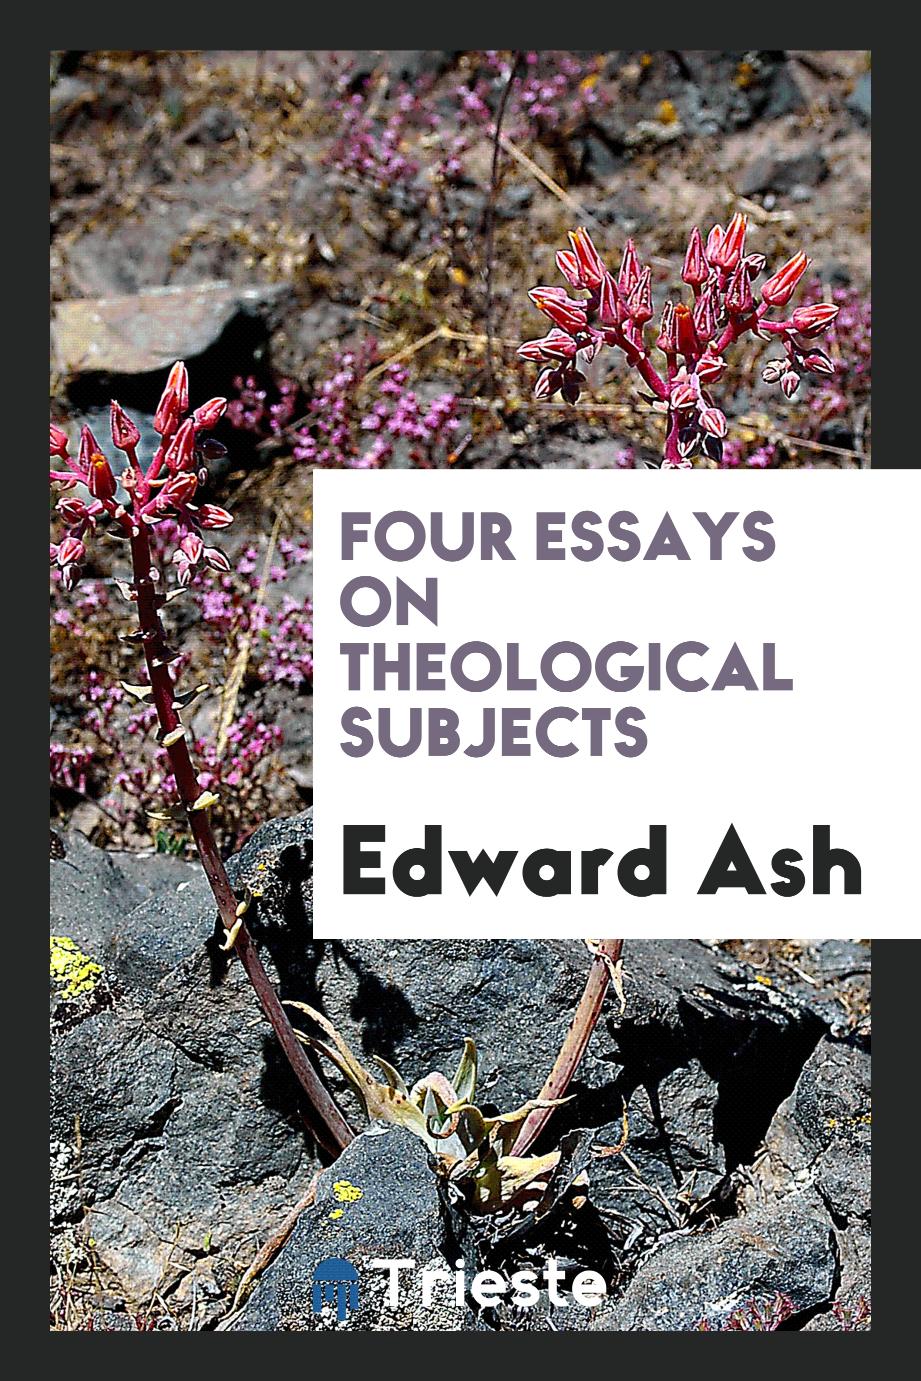 Four essays on theological subjects